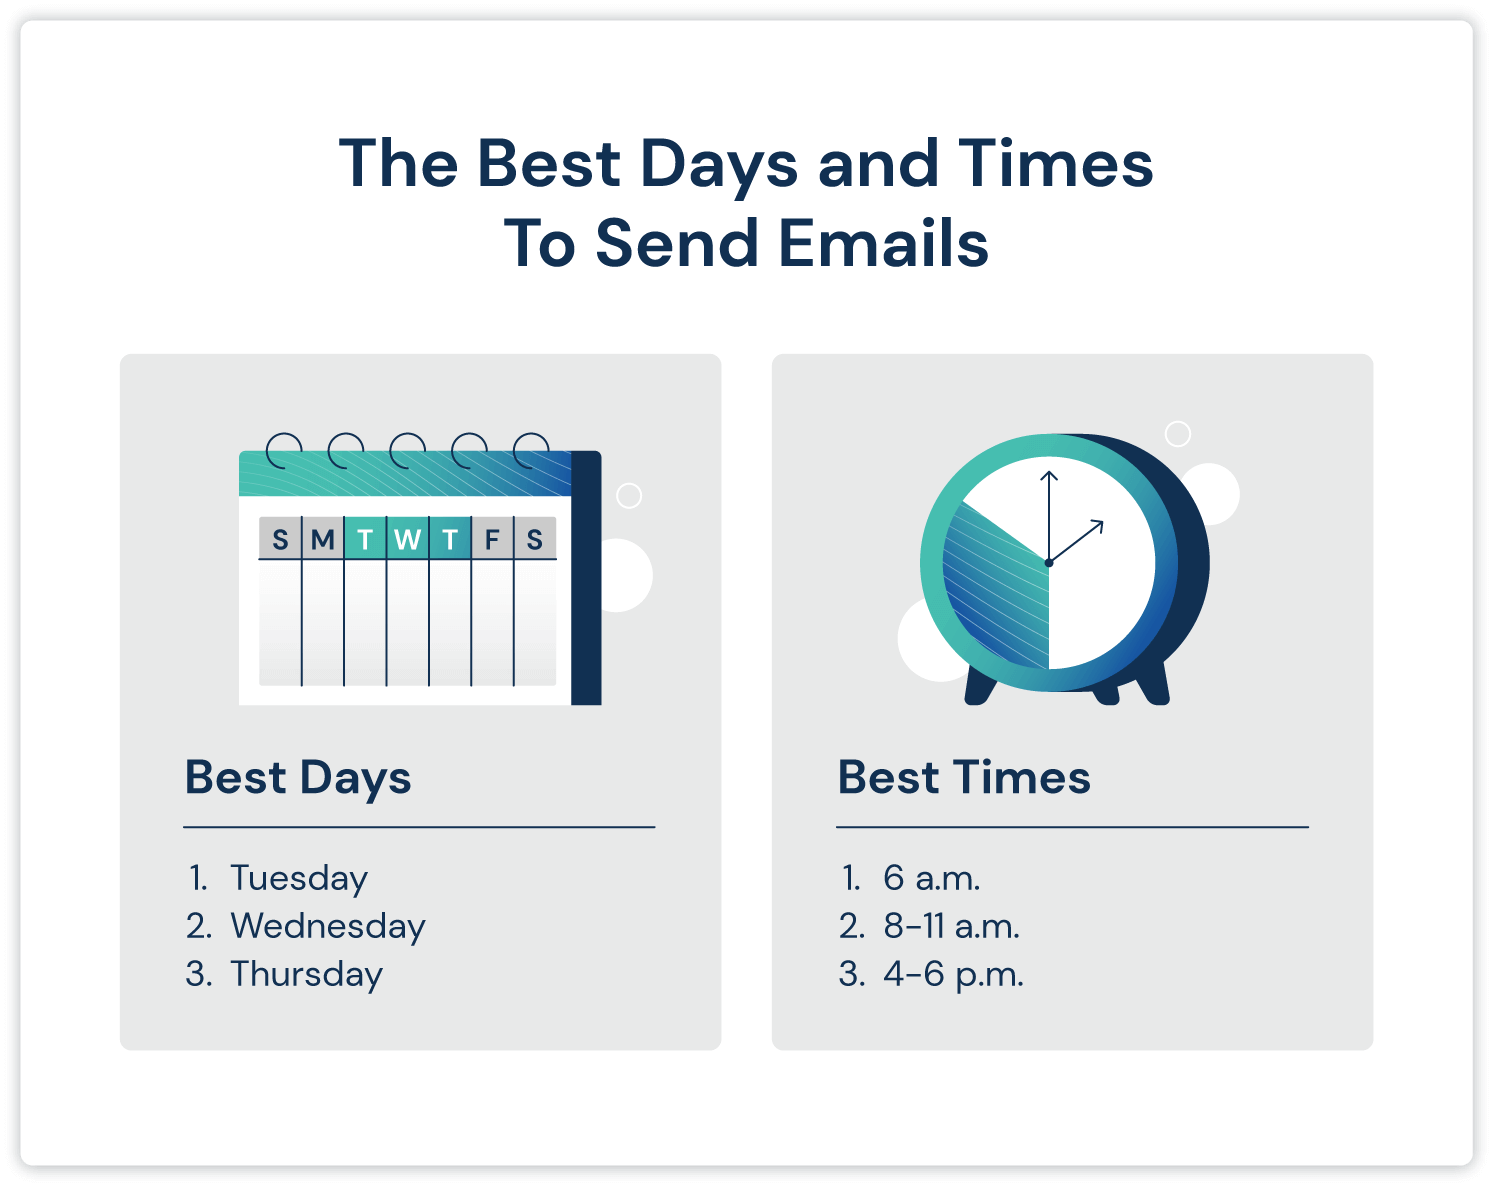 Best Days and Times to Send Emails